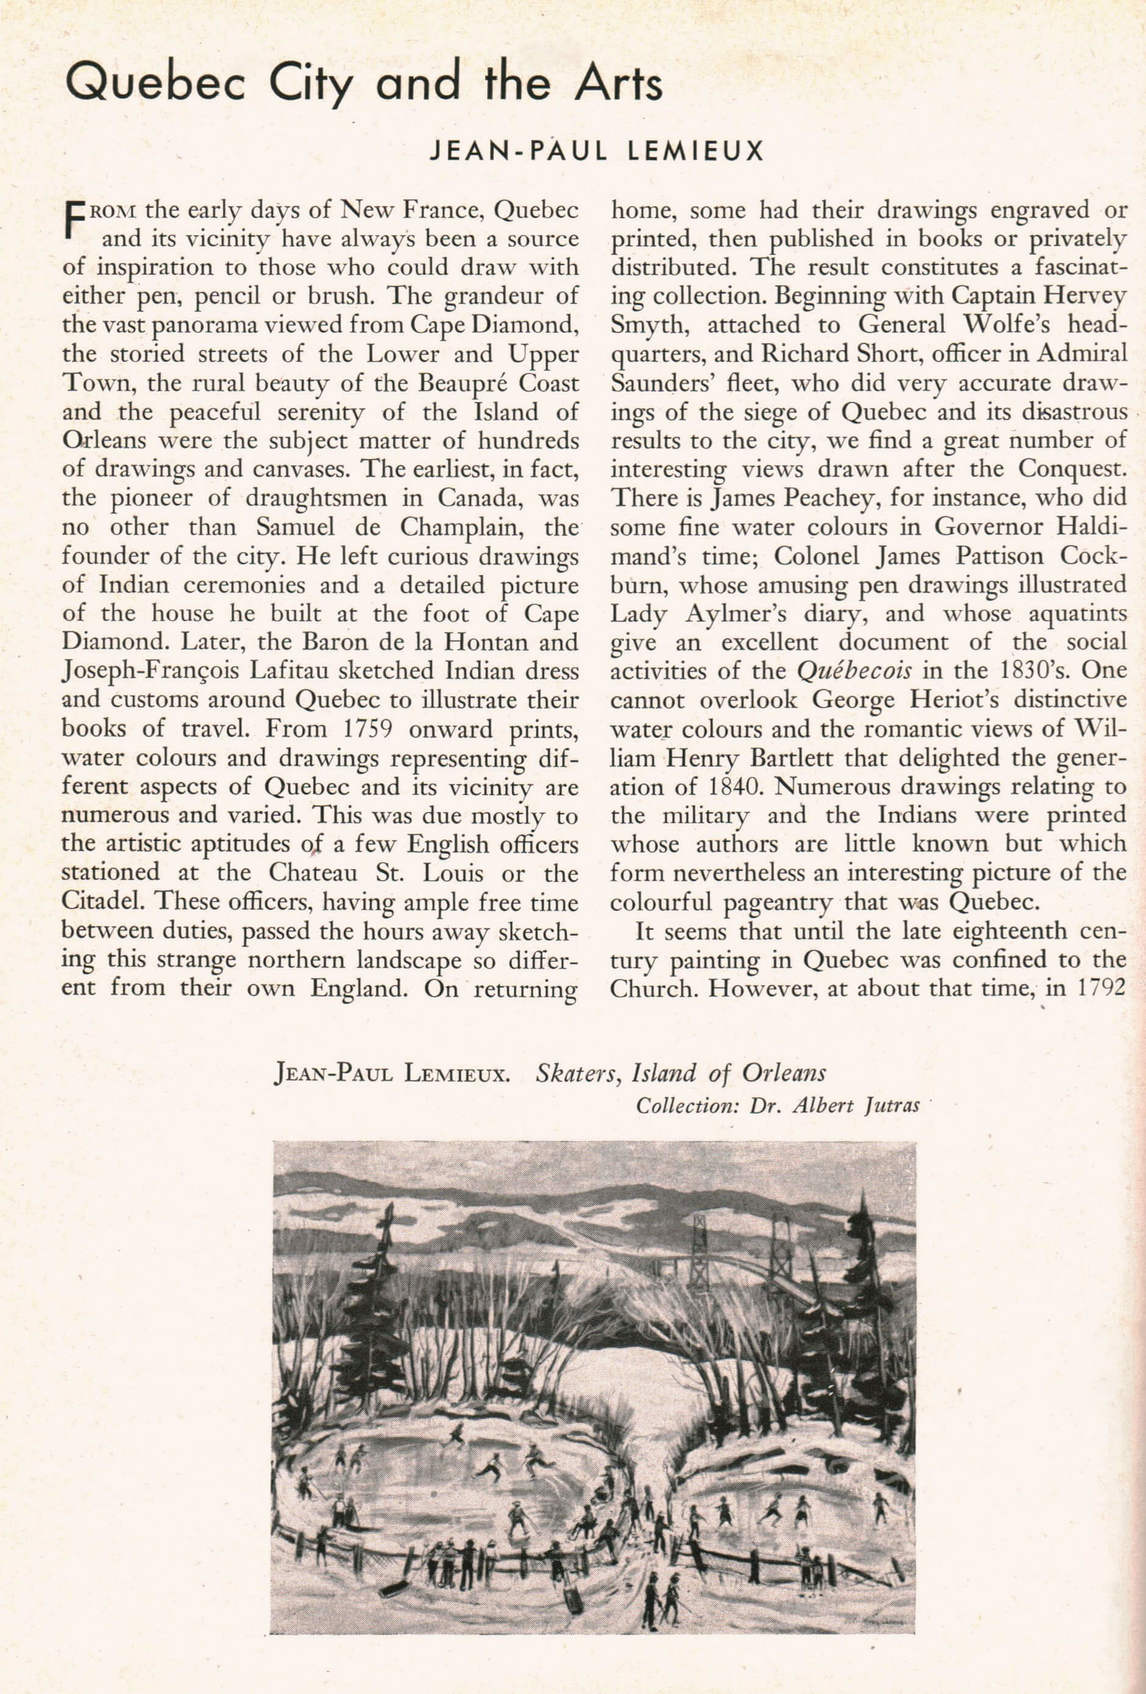 Art Canada Institute, photograph of Jean Paul Lemieux’s article “Quebec City and the Arts” from the December 1947 issue of Canadian Art magazine